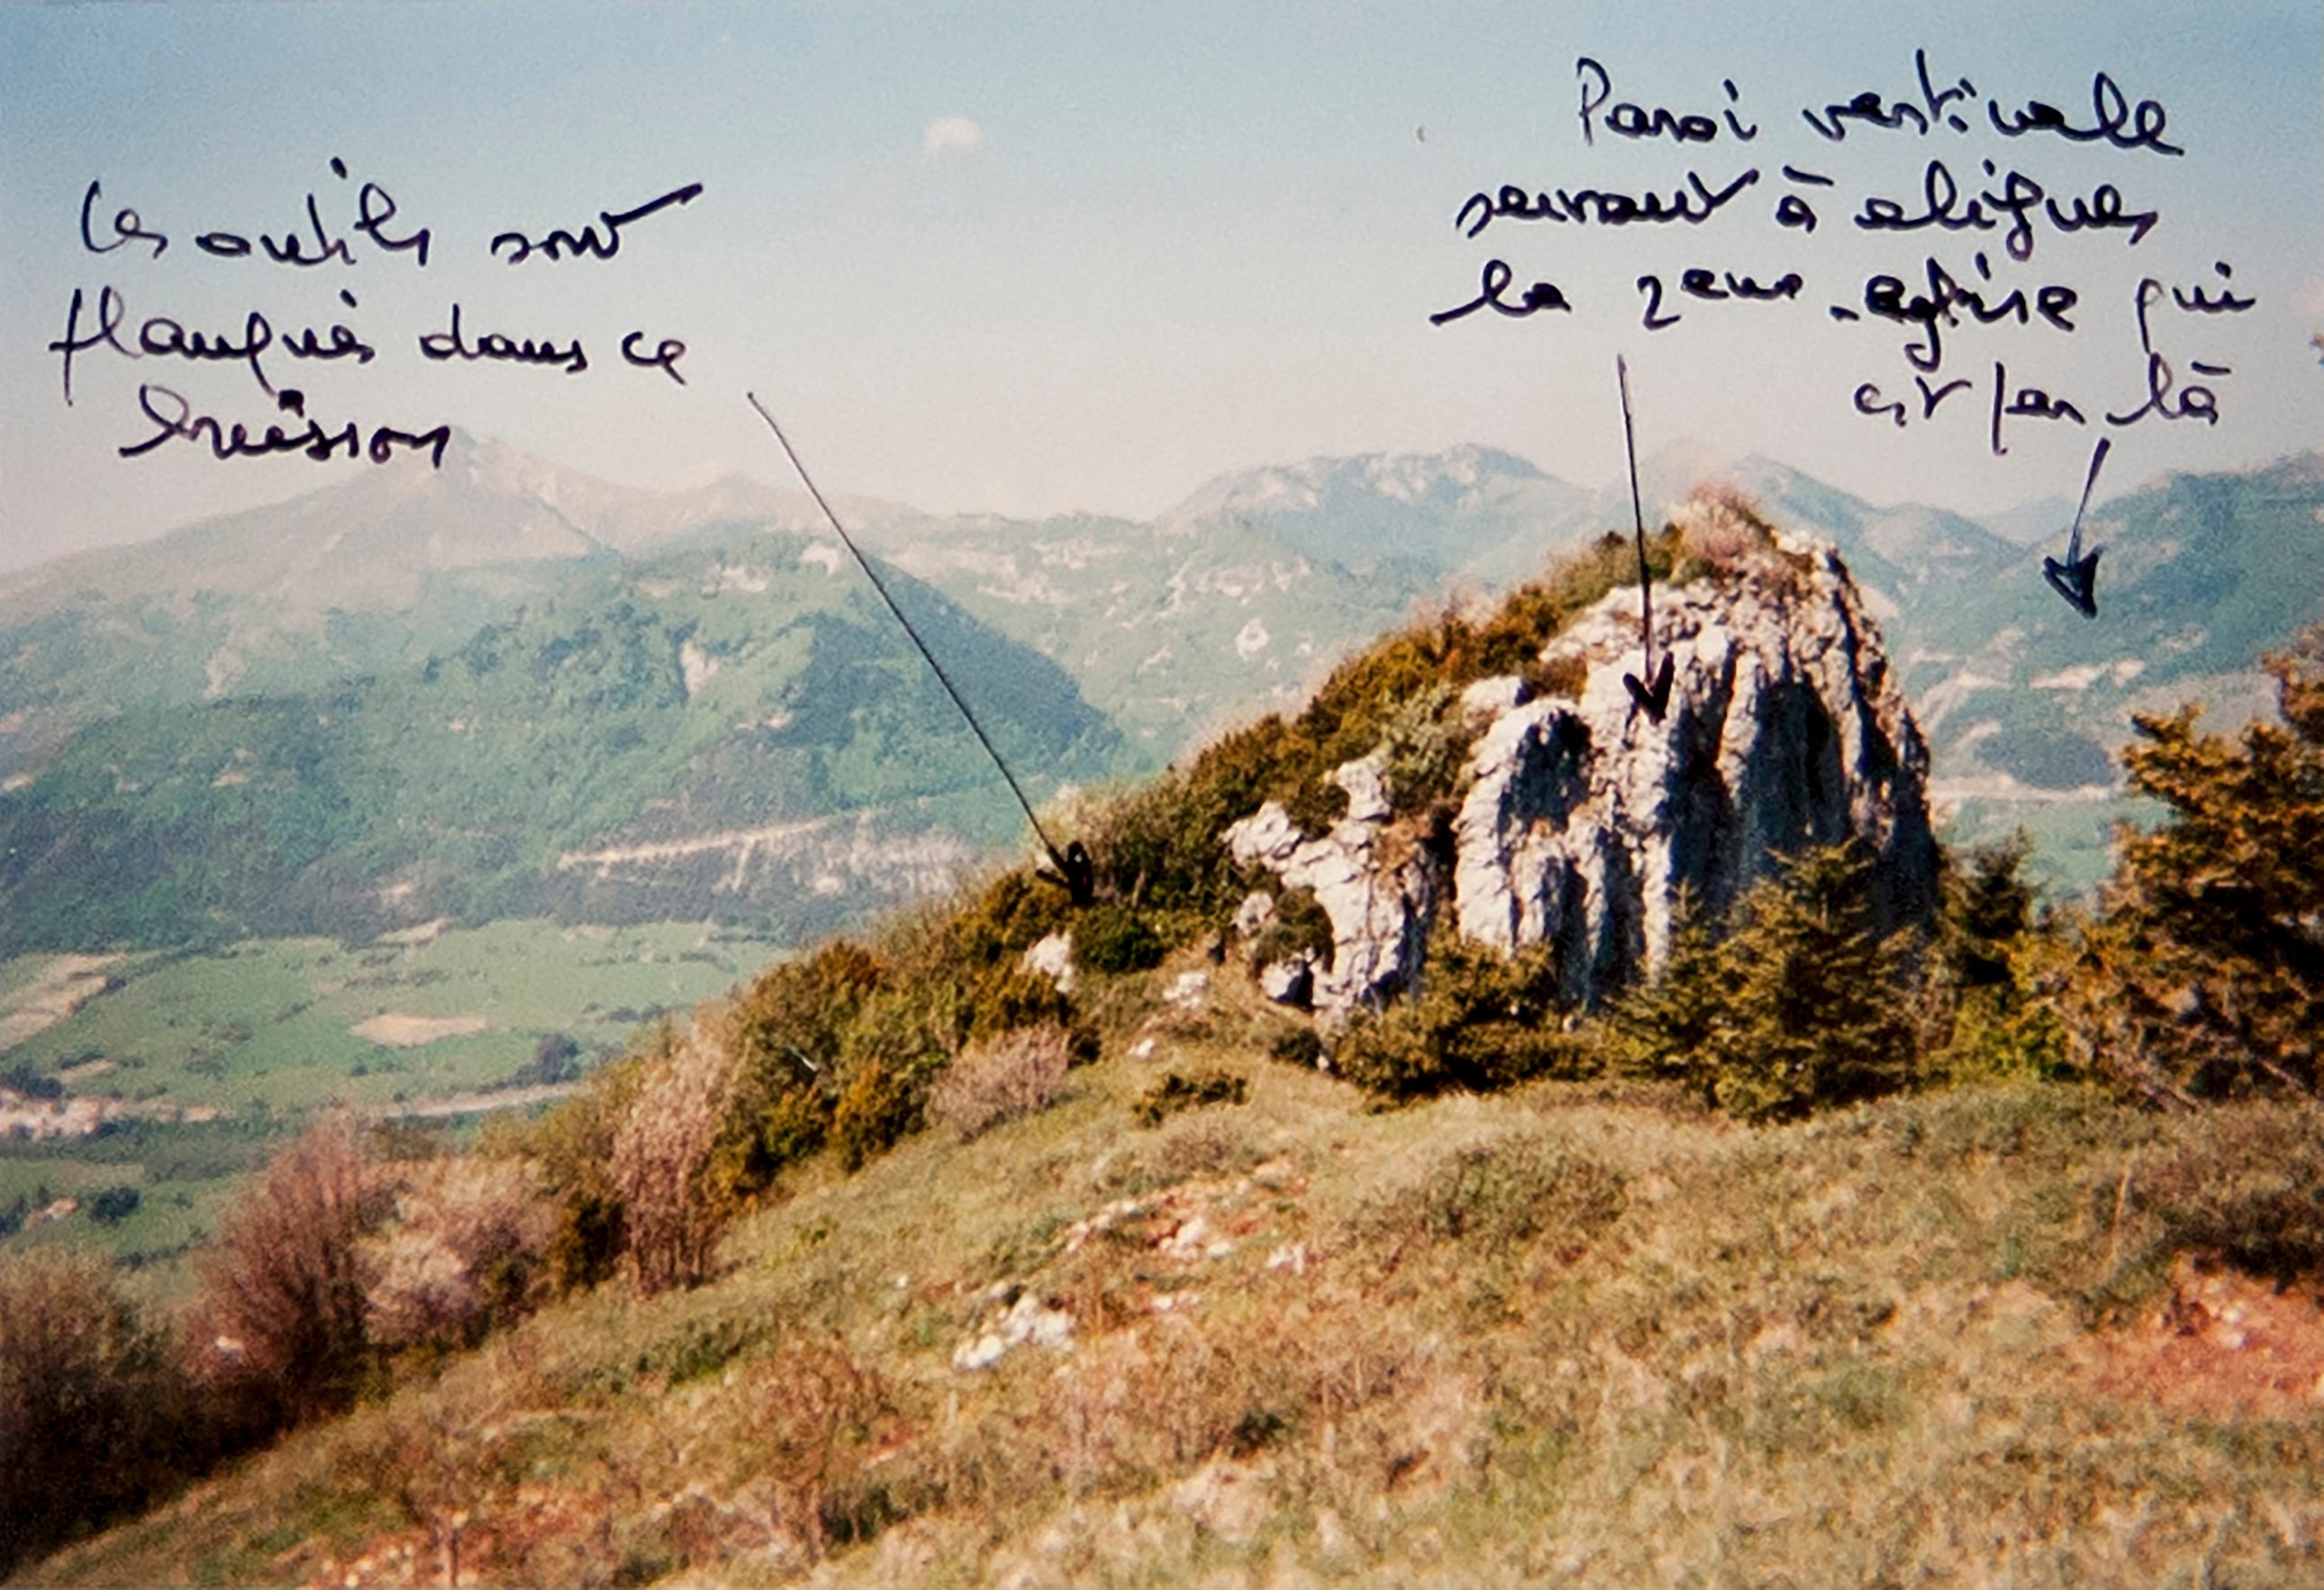 Landscape of the French mountains in Lus-la-Croix-Haute annotated by Crolet for his research on the Golden Owl hunt. 